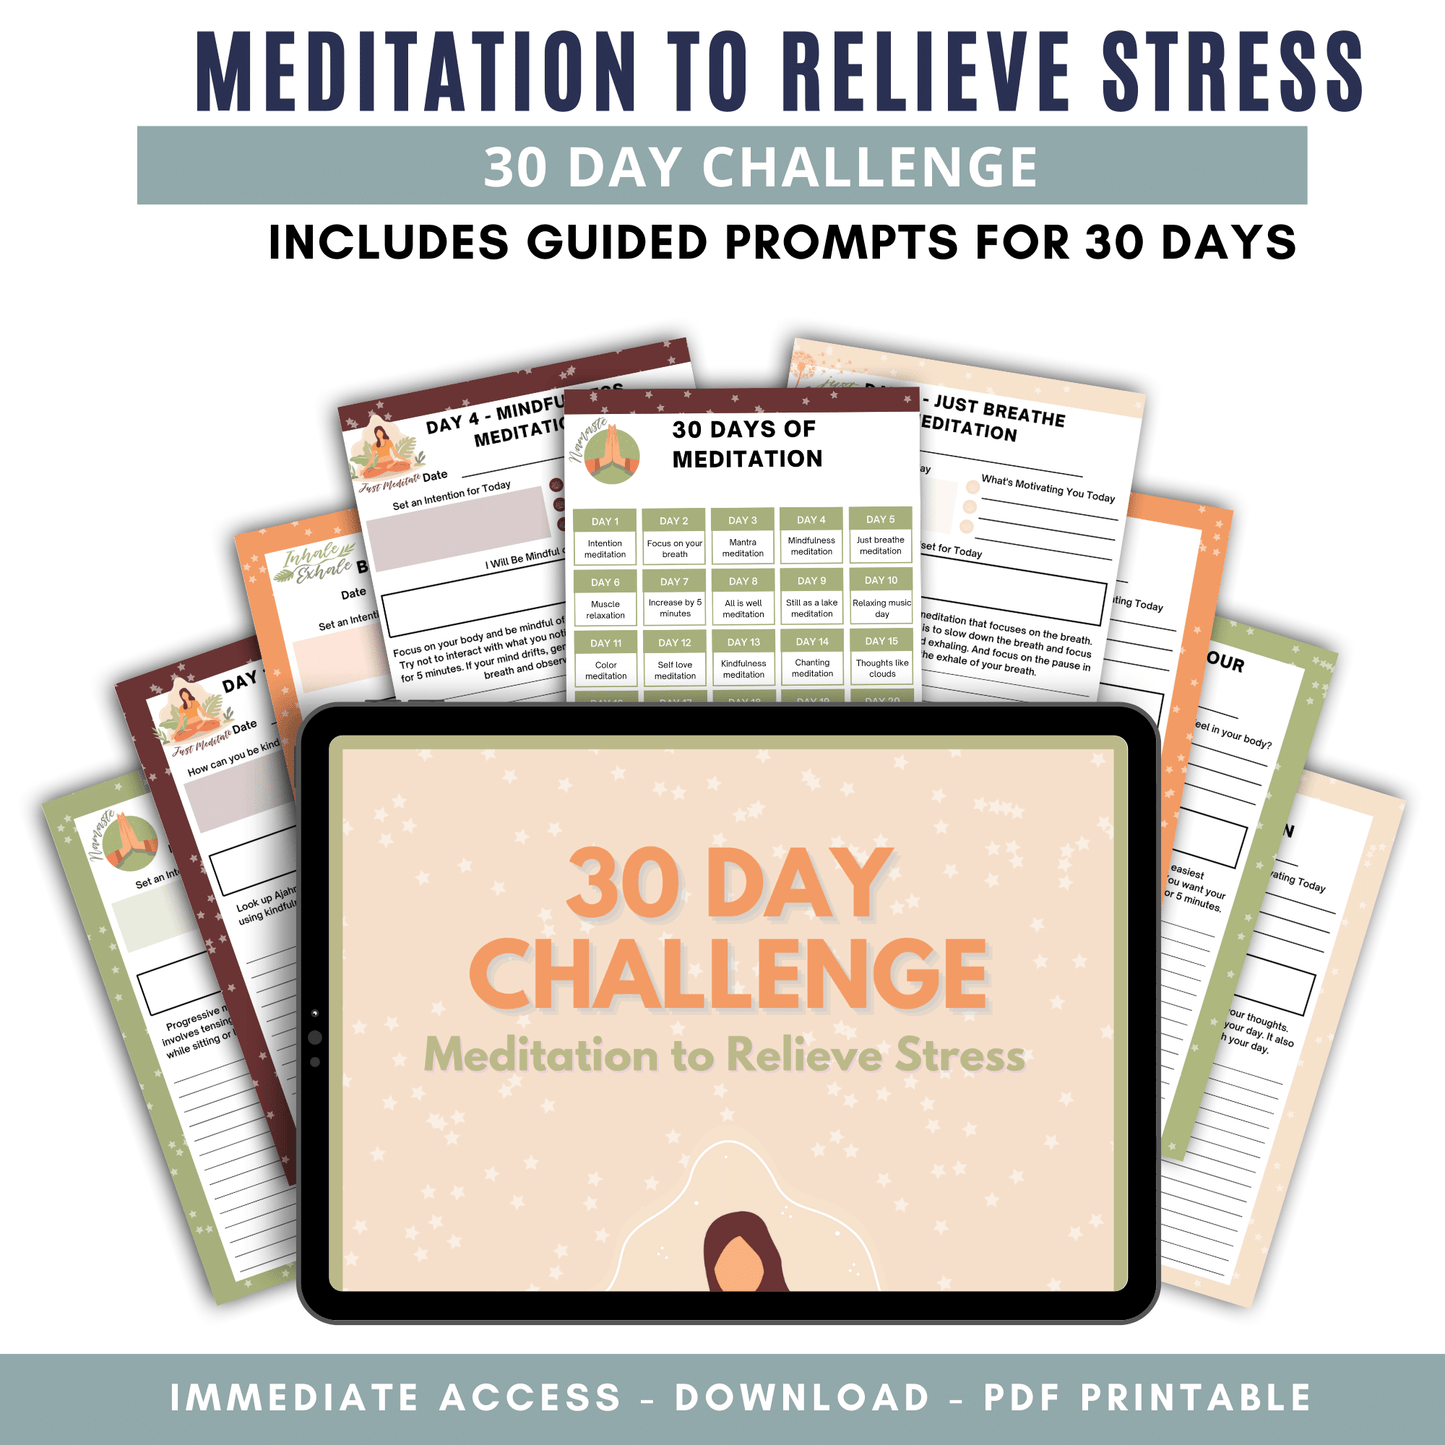 Meditation to Relieve Stress 30 Day Challenge